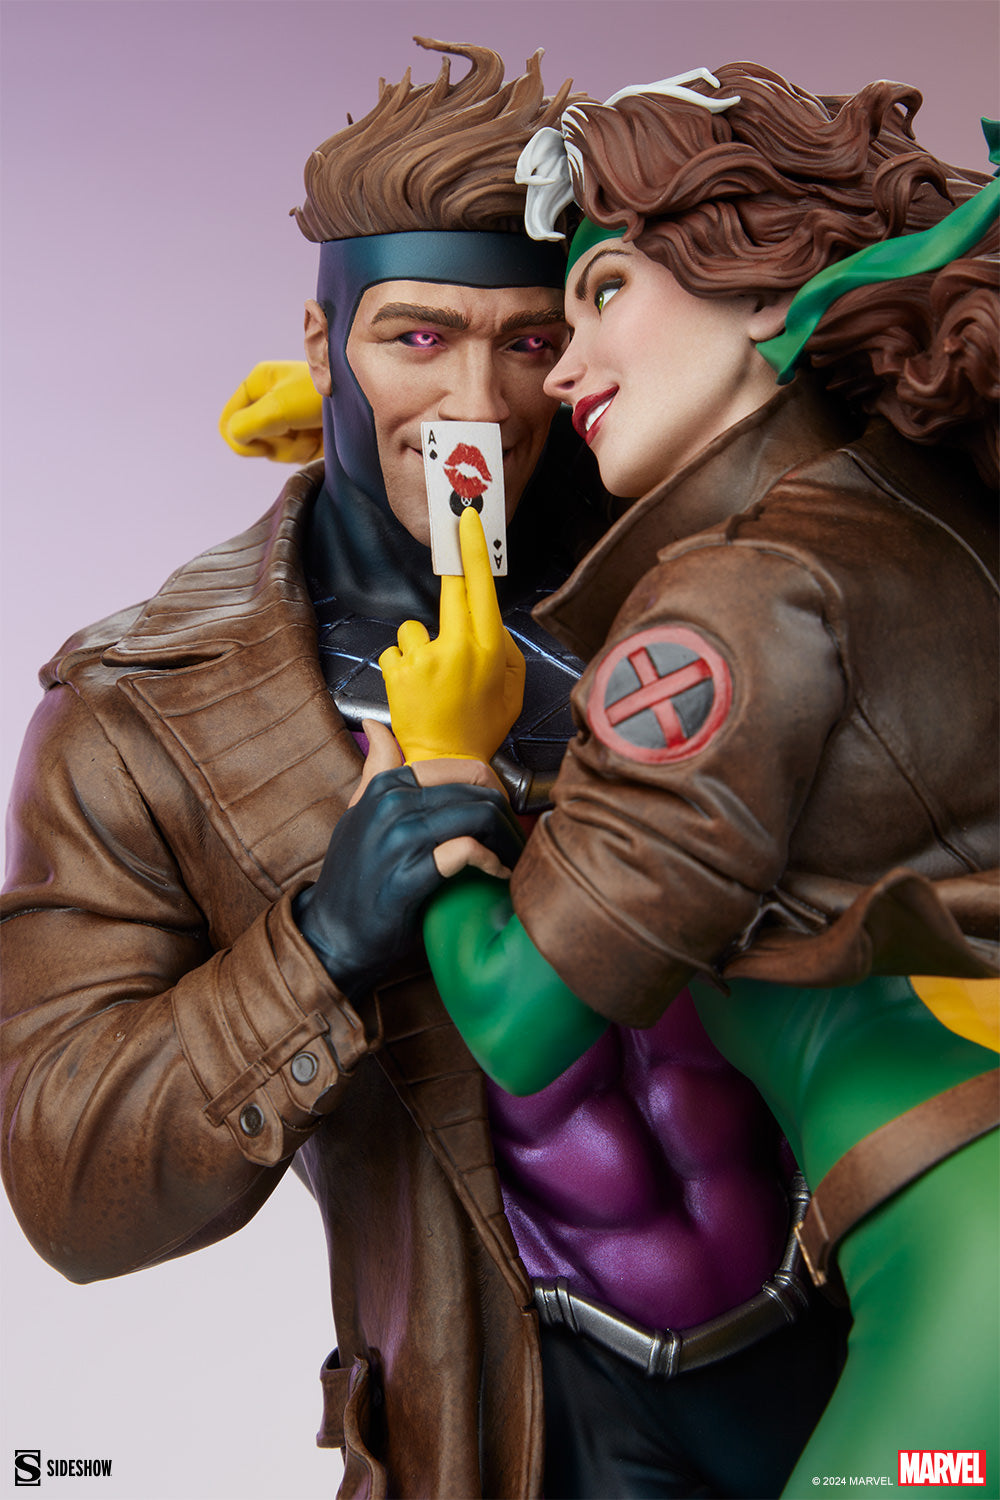 PRE-ORDER Rogue & Gambit Statues